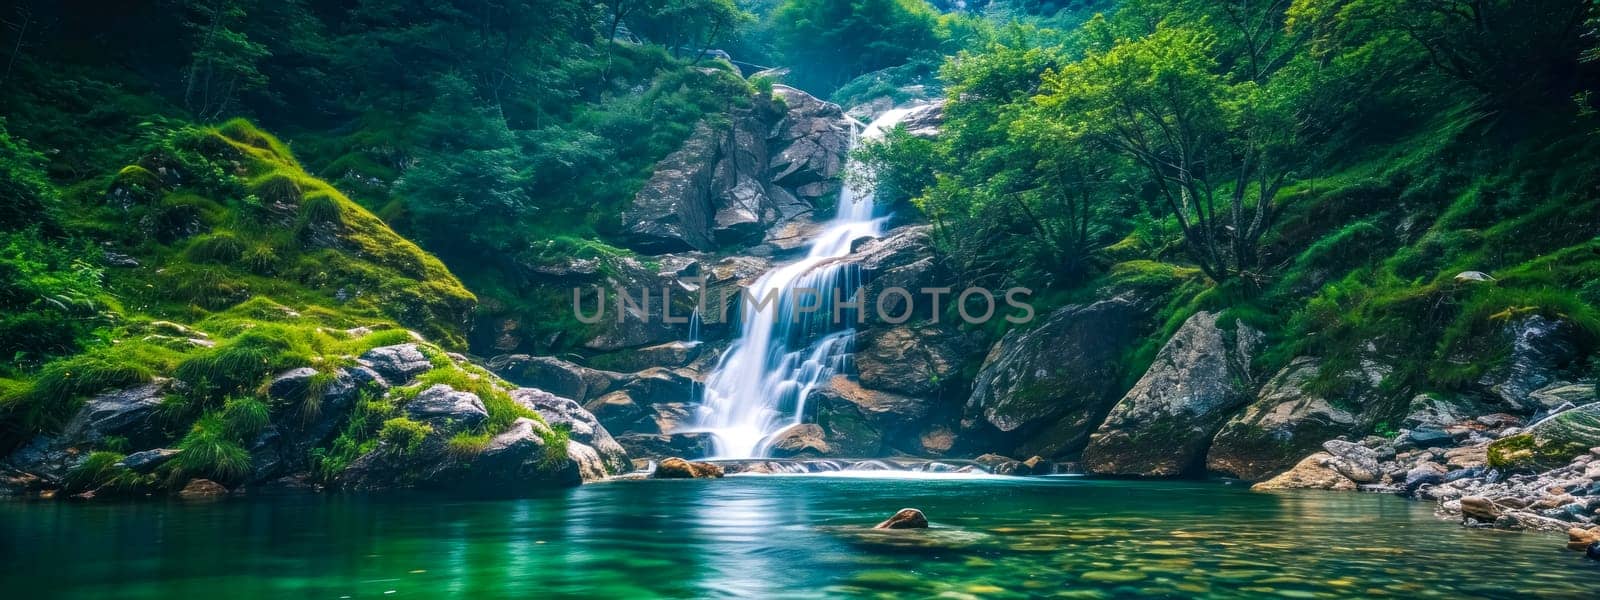 Serene mountain waterfall into a tranquil pool, surrounded by lush greenery under soft sunlight by Edophoto